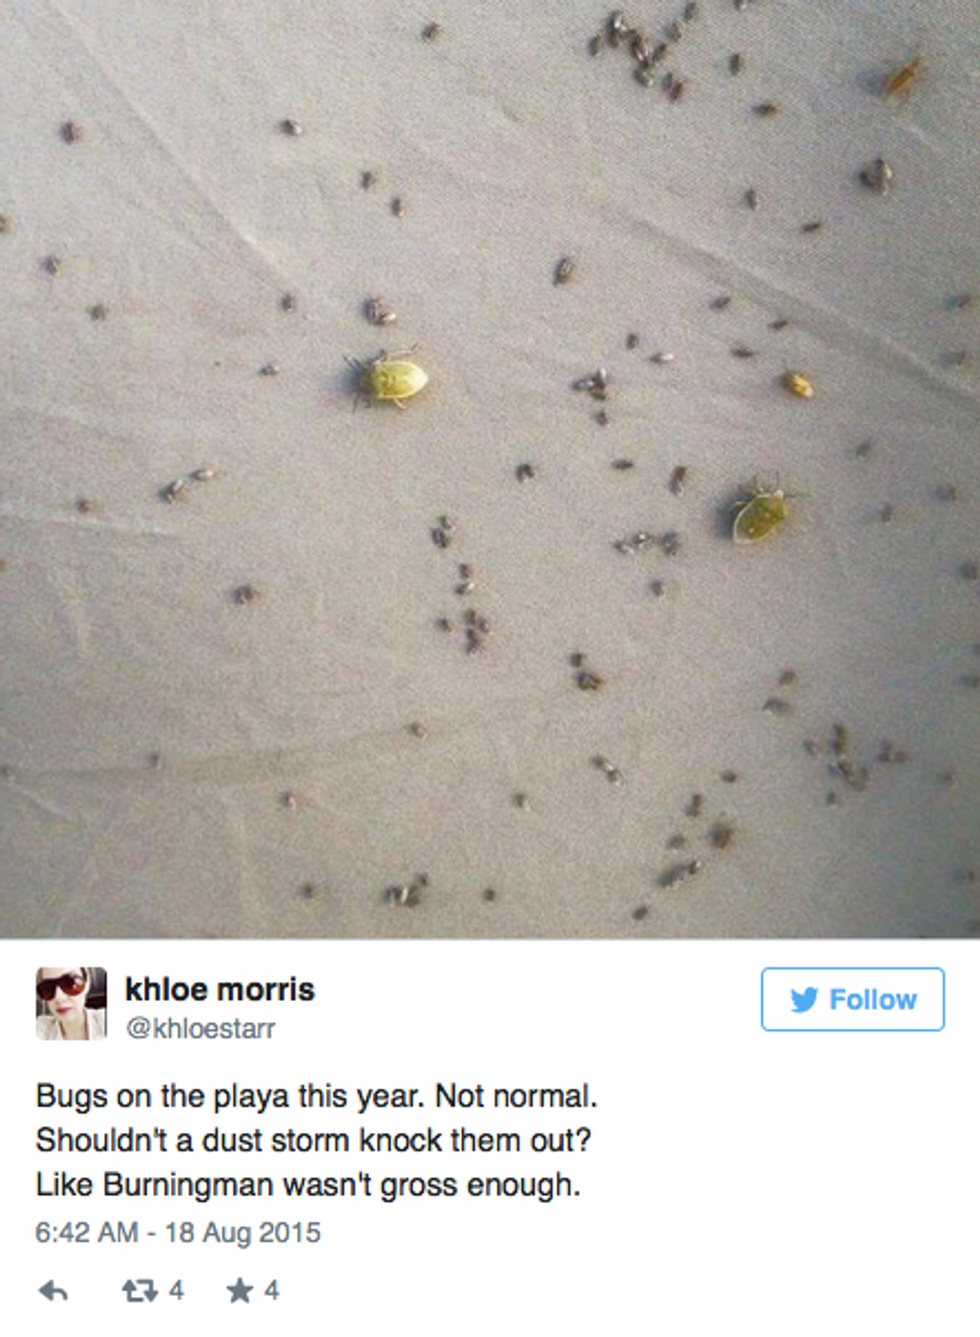 Here's Your Daily Dose of Schadenfreude: Burning Man Is Infested With Horrible Bugs